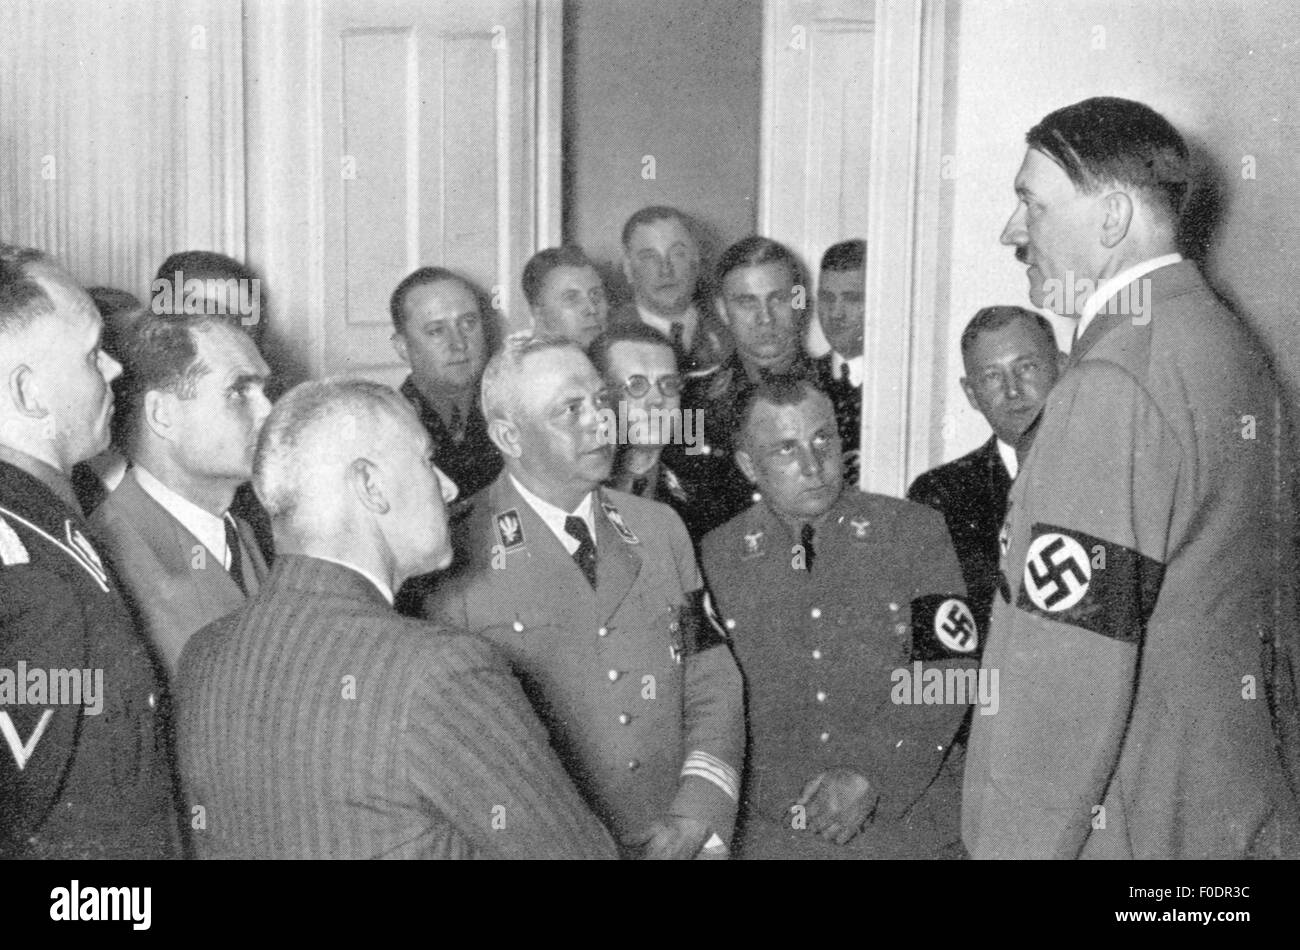 Hitler, Adolf, 20.4.1889 - 30.4.1945, German politician (NSDAP), Chancellor of the Reich 30.1.1933 - 30.4.1945, with the staff of the Chancellery of the Reich on the evening of the Reichstag Election, 29.3.1936, Stock Photo